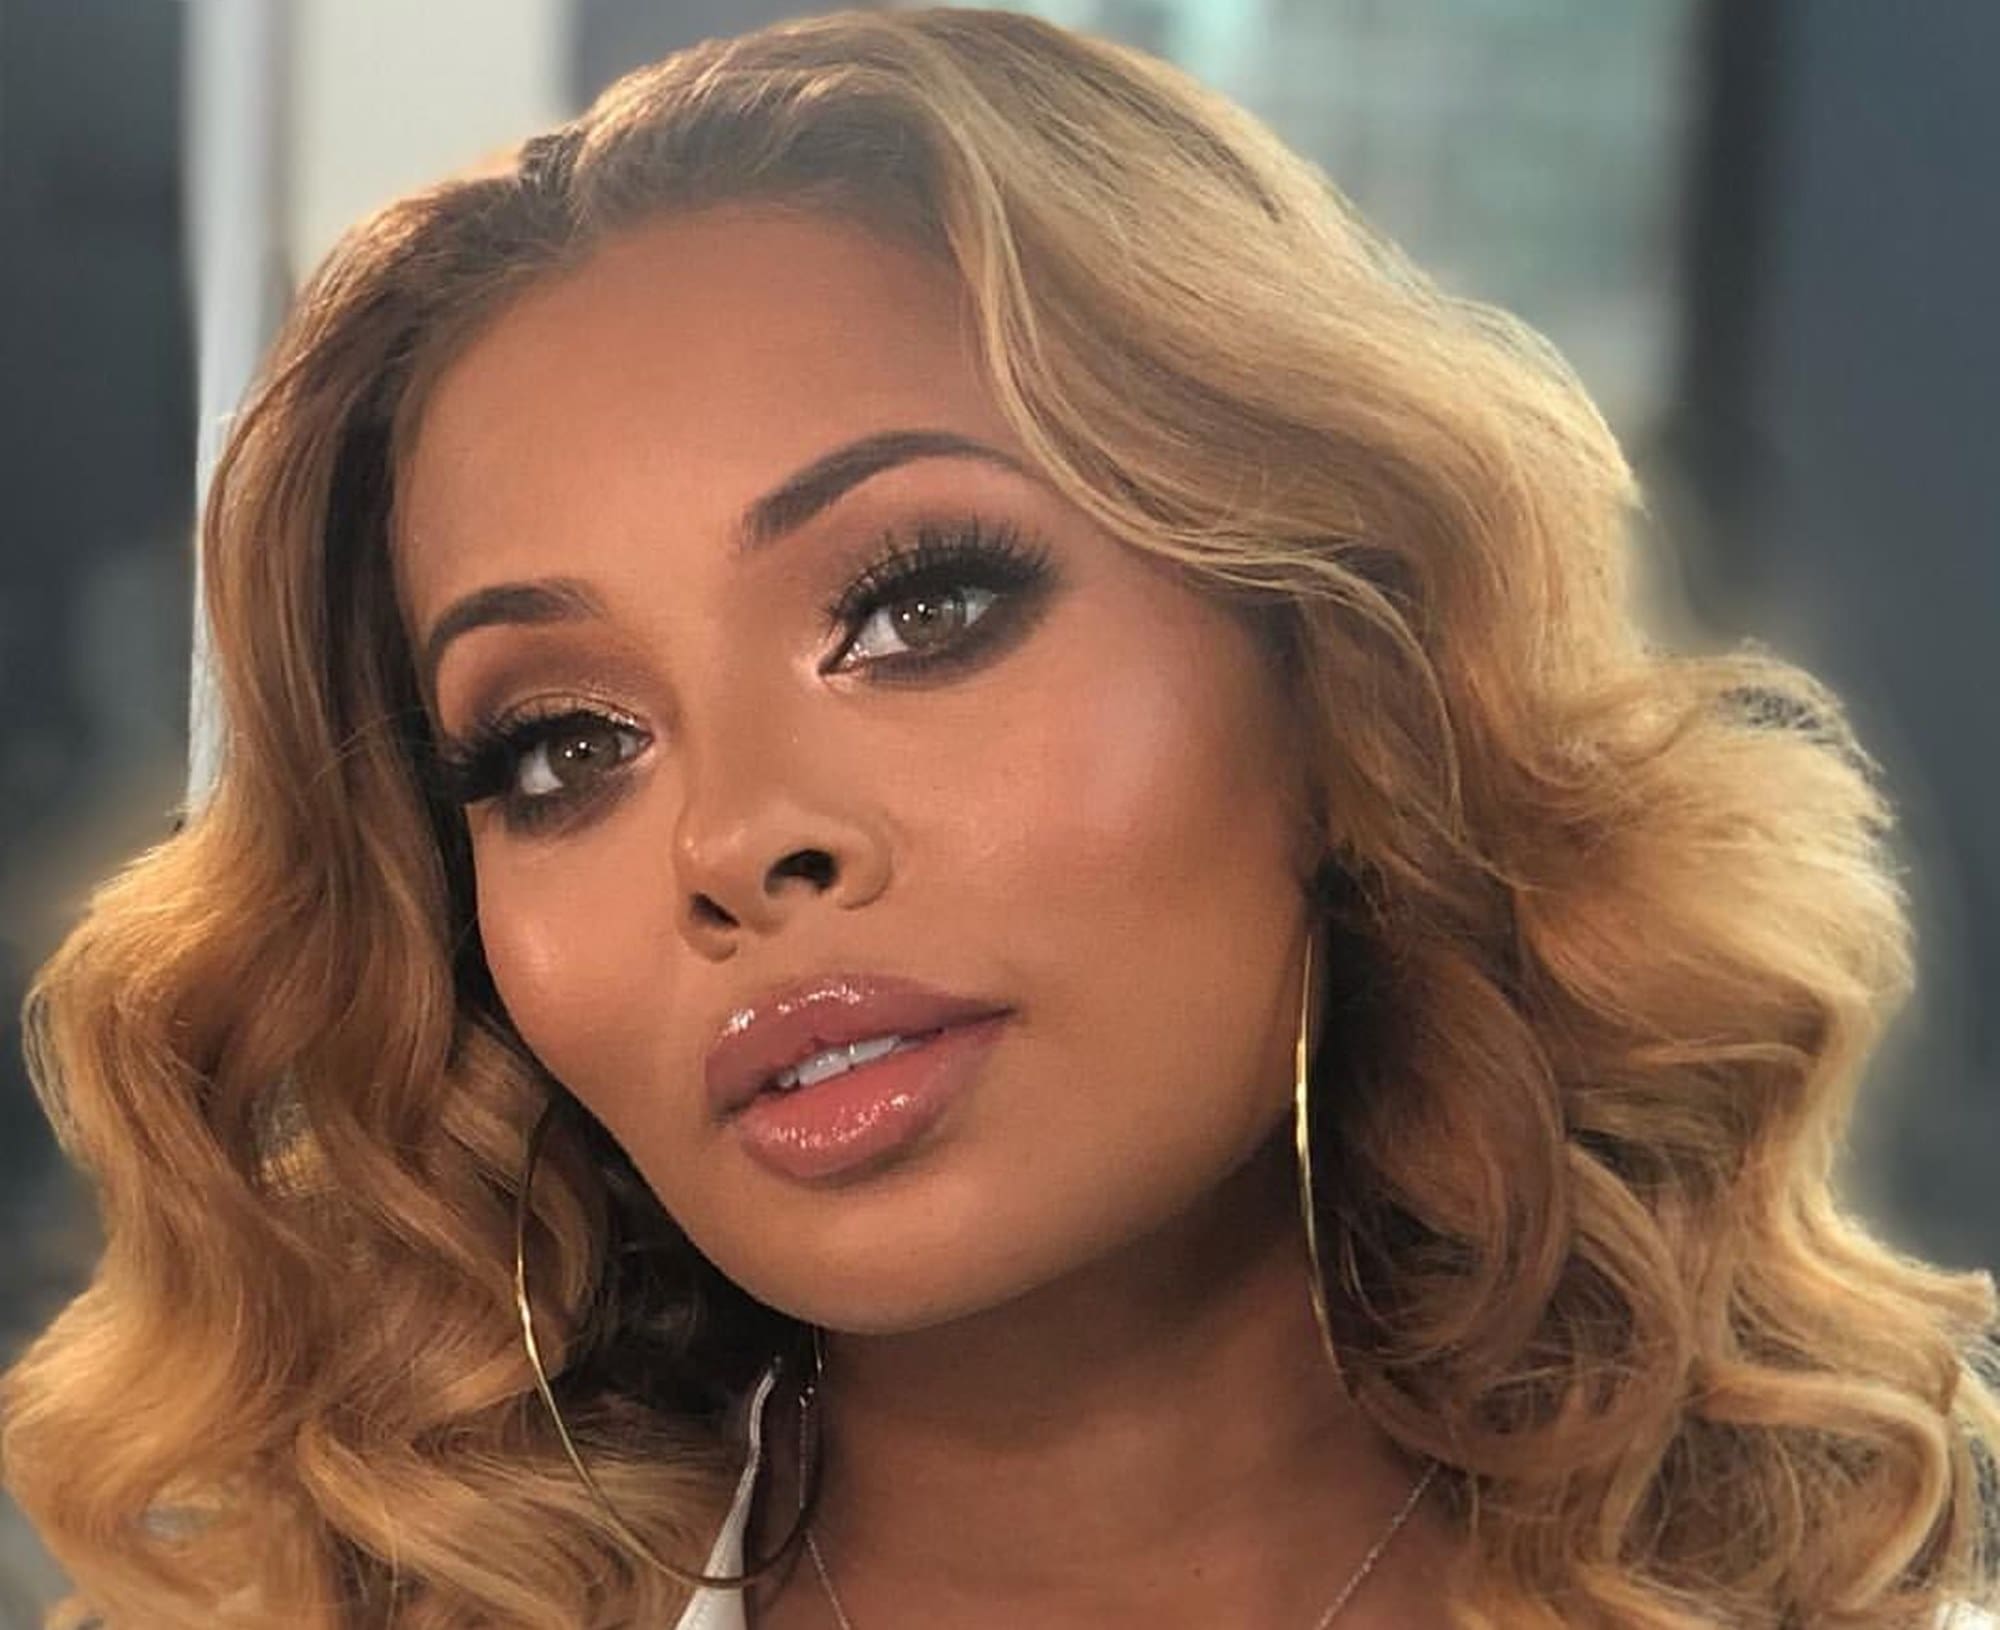 Eva Marcille's Video Featuring Marley Rae Has Fans In Awe - Check Out The Clips She Posted